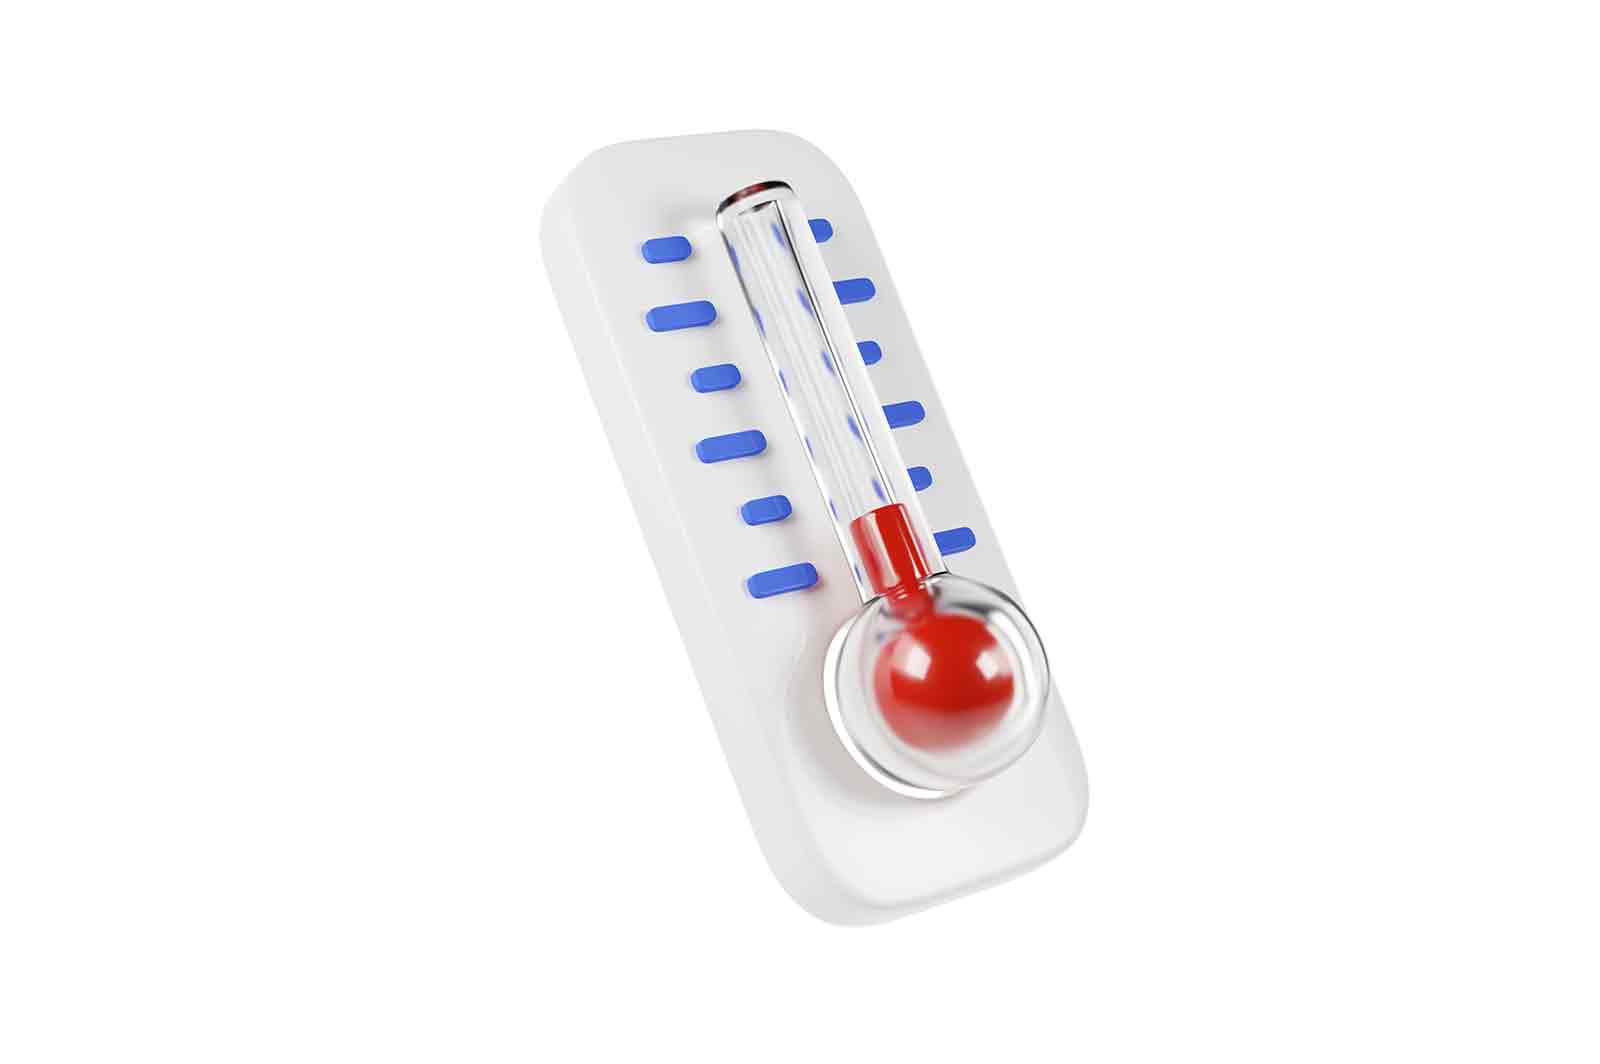 Thermometer showing cold temperatures 3d rendered illustration. Low temperature symbol. Device for measurement of temperature outside